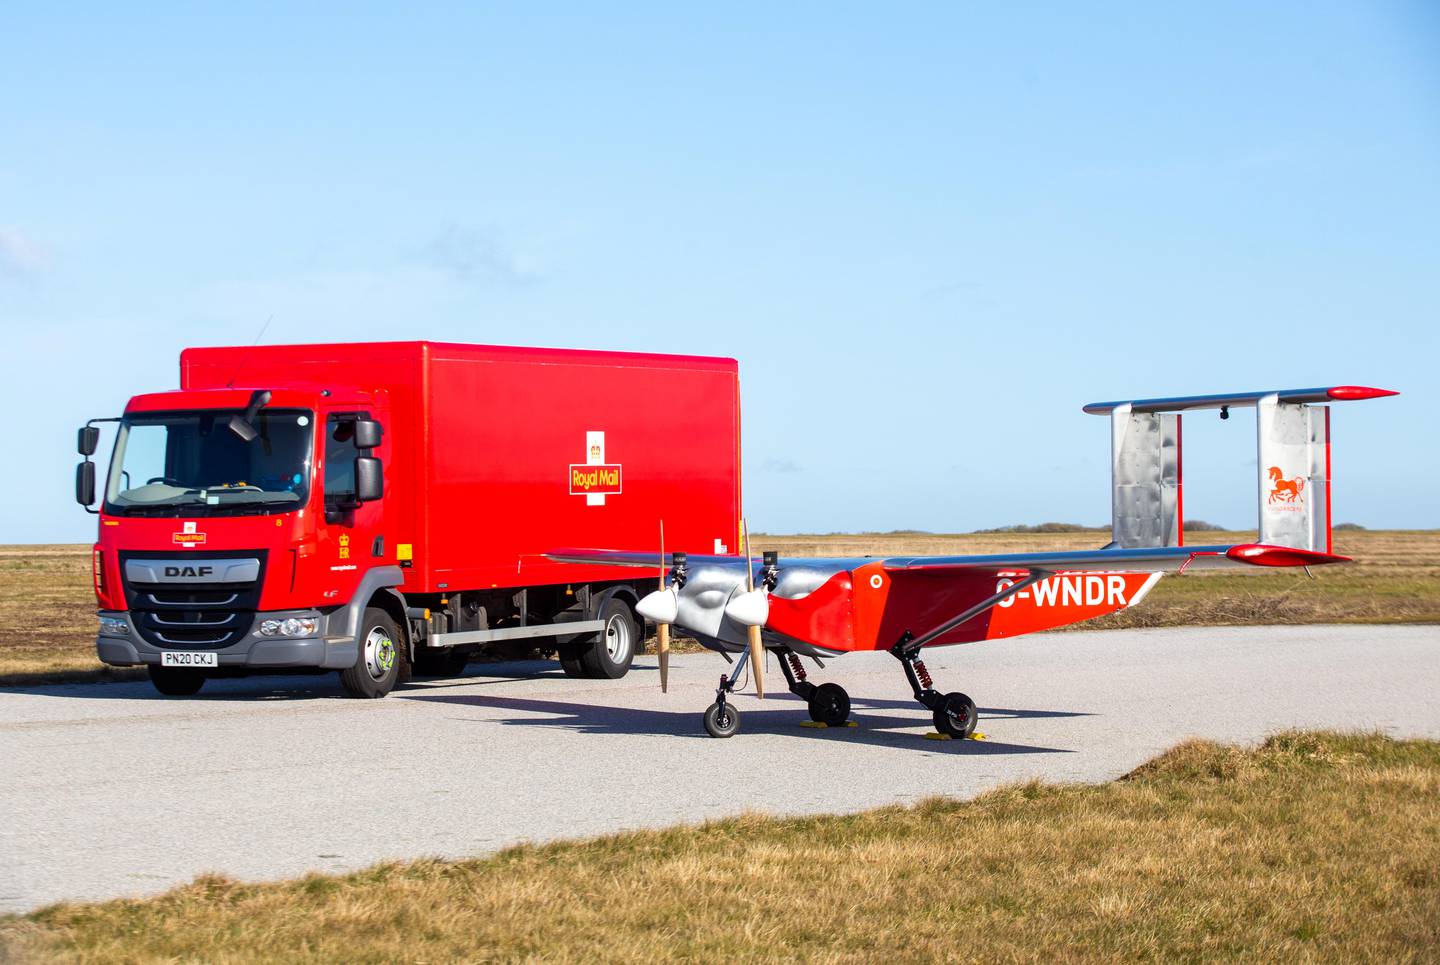 Royal Mail is aiming to use up to 200 drones over the next three years, increasing to more than 500. PA